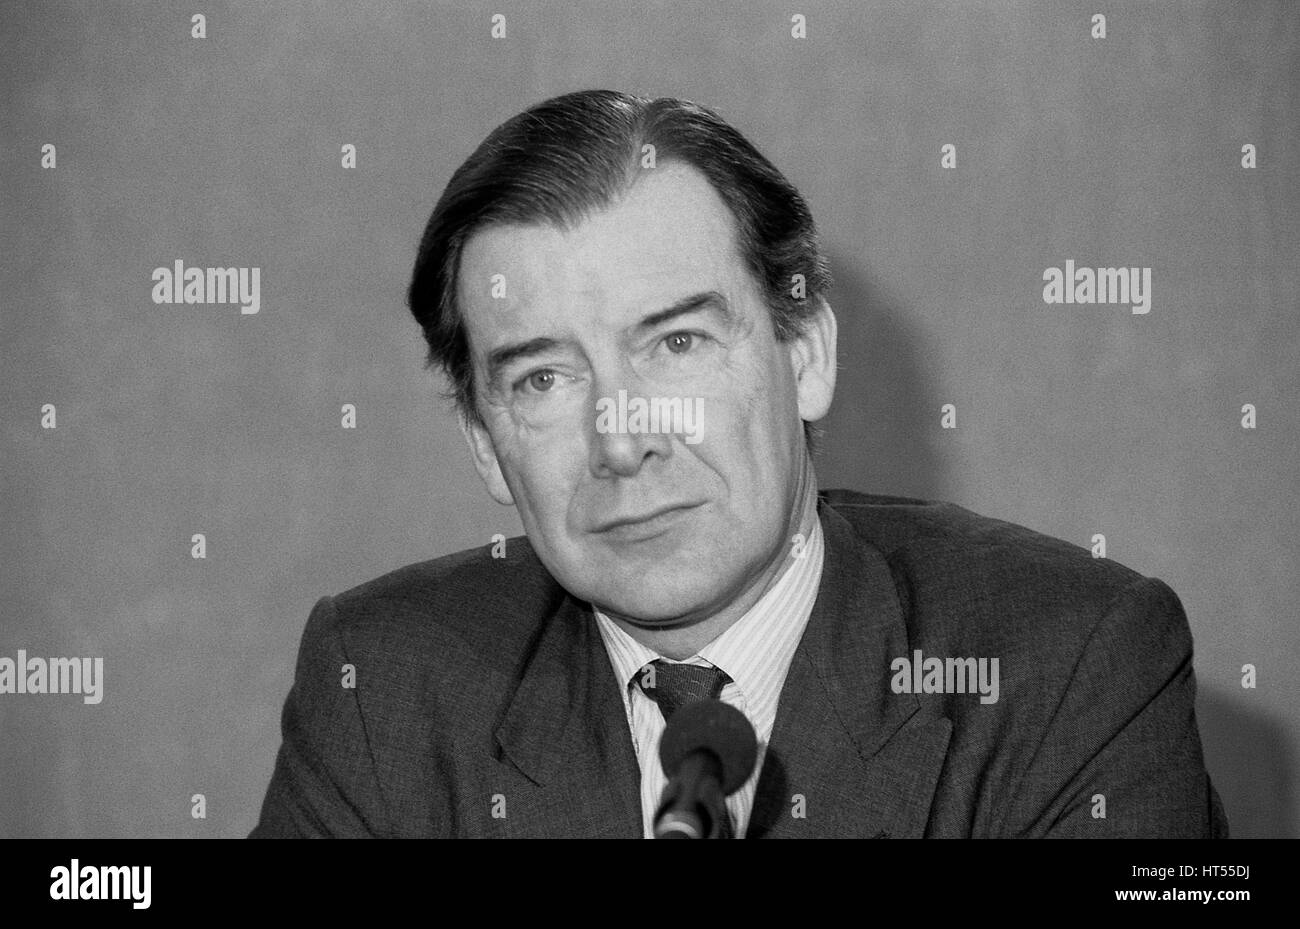 Rt. Hon. Ian Lang, Secretary of State for Scotland and Conservative party Member of Parliament for Galloway and Upper Nithsdale, speaks at a party press conference in London, England on February 26, 1992. Stock Photo